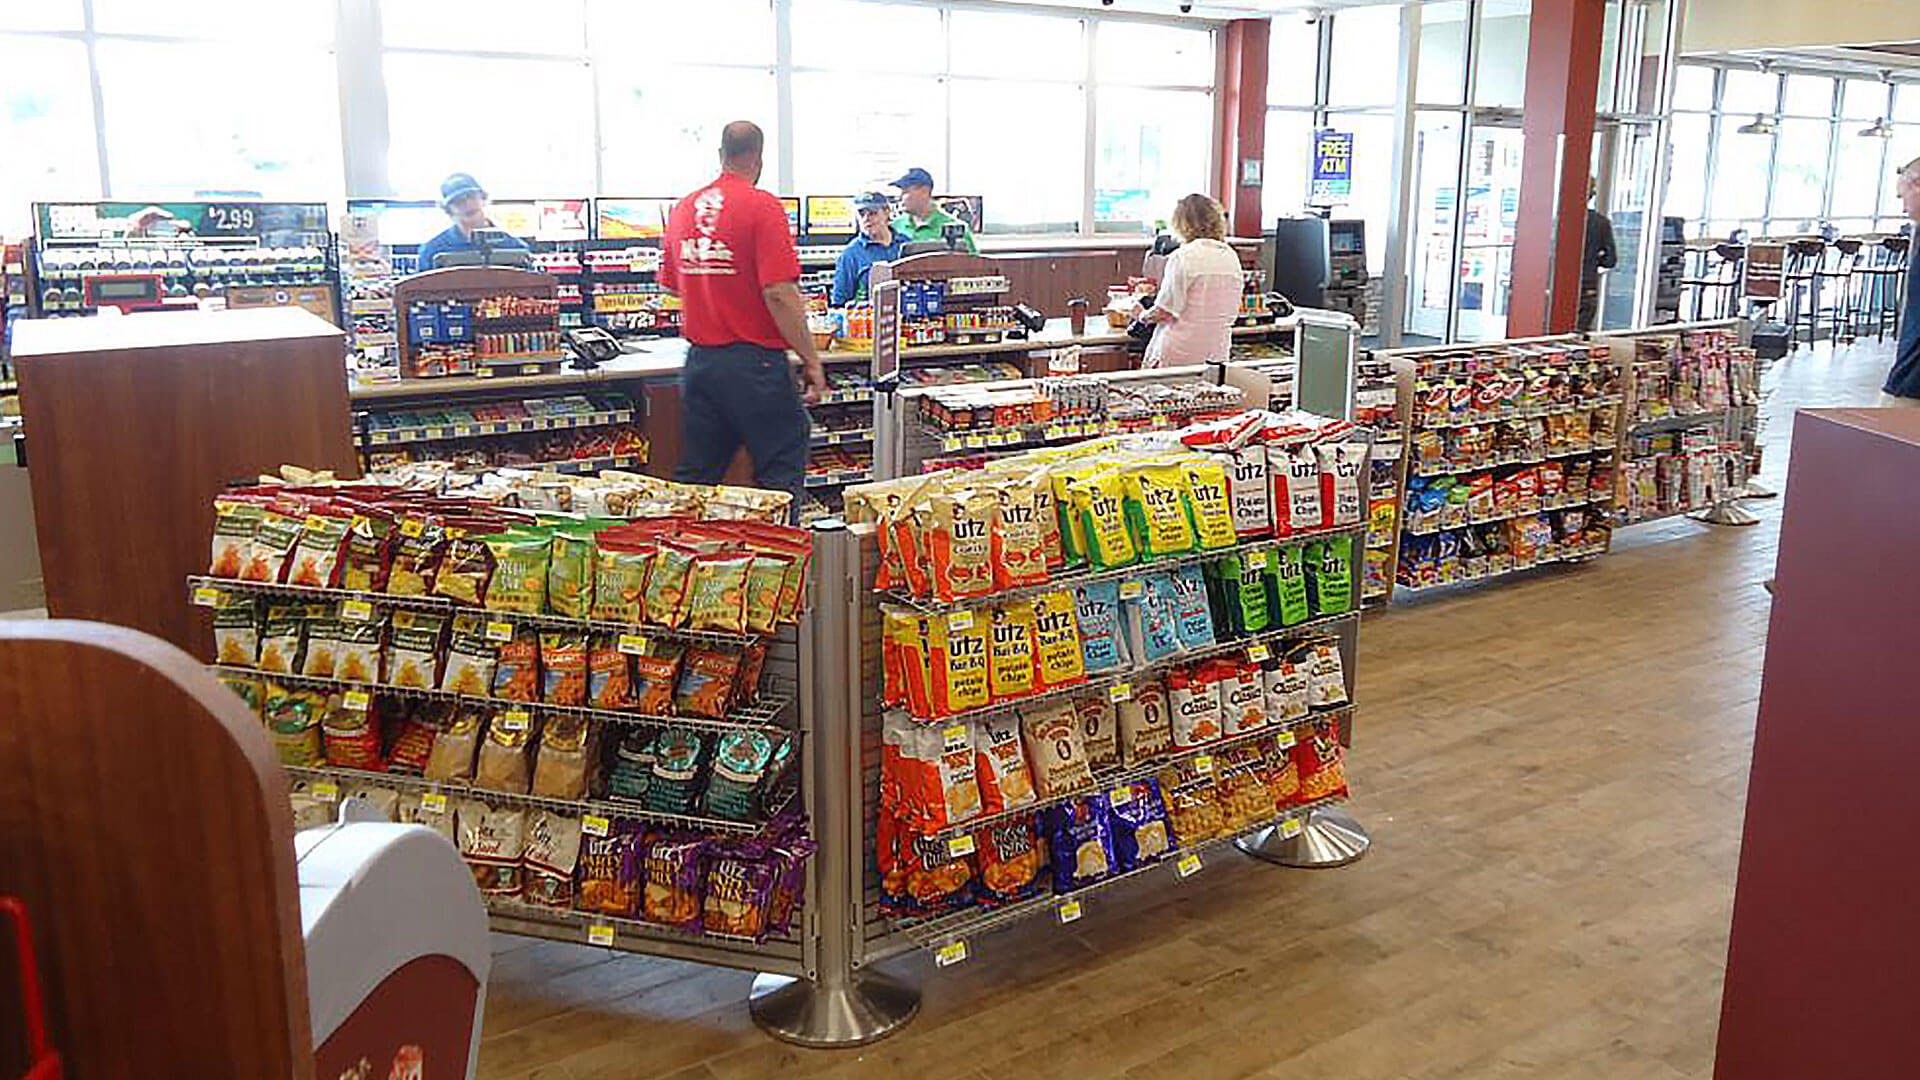 Retail,Merchandising,Queuing,Slatwall,Stanchions,Signage